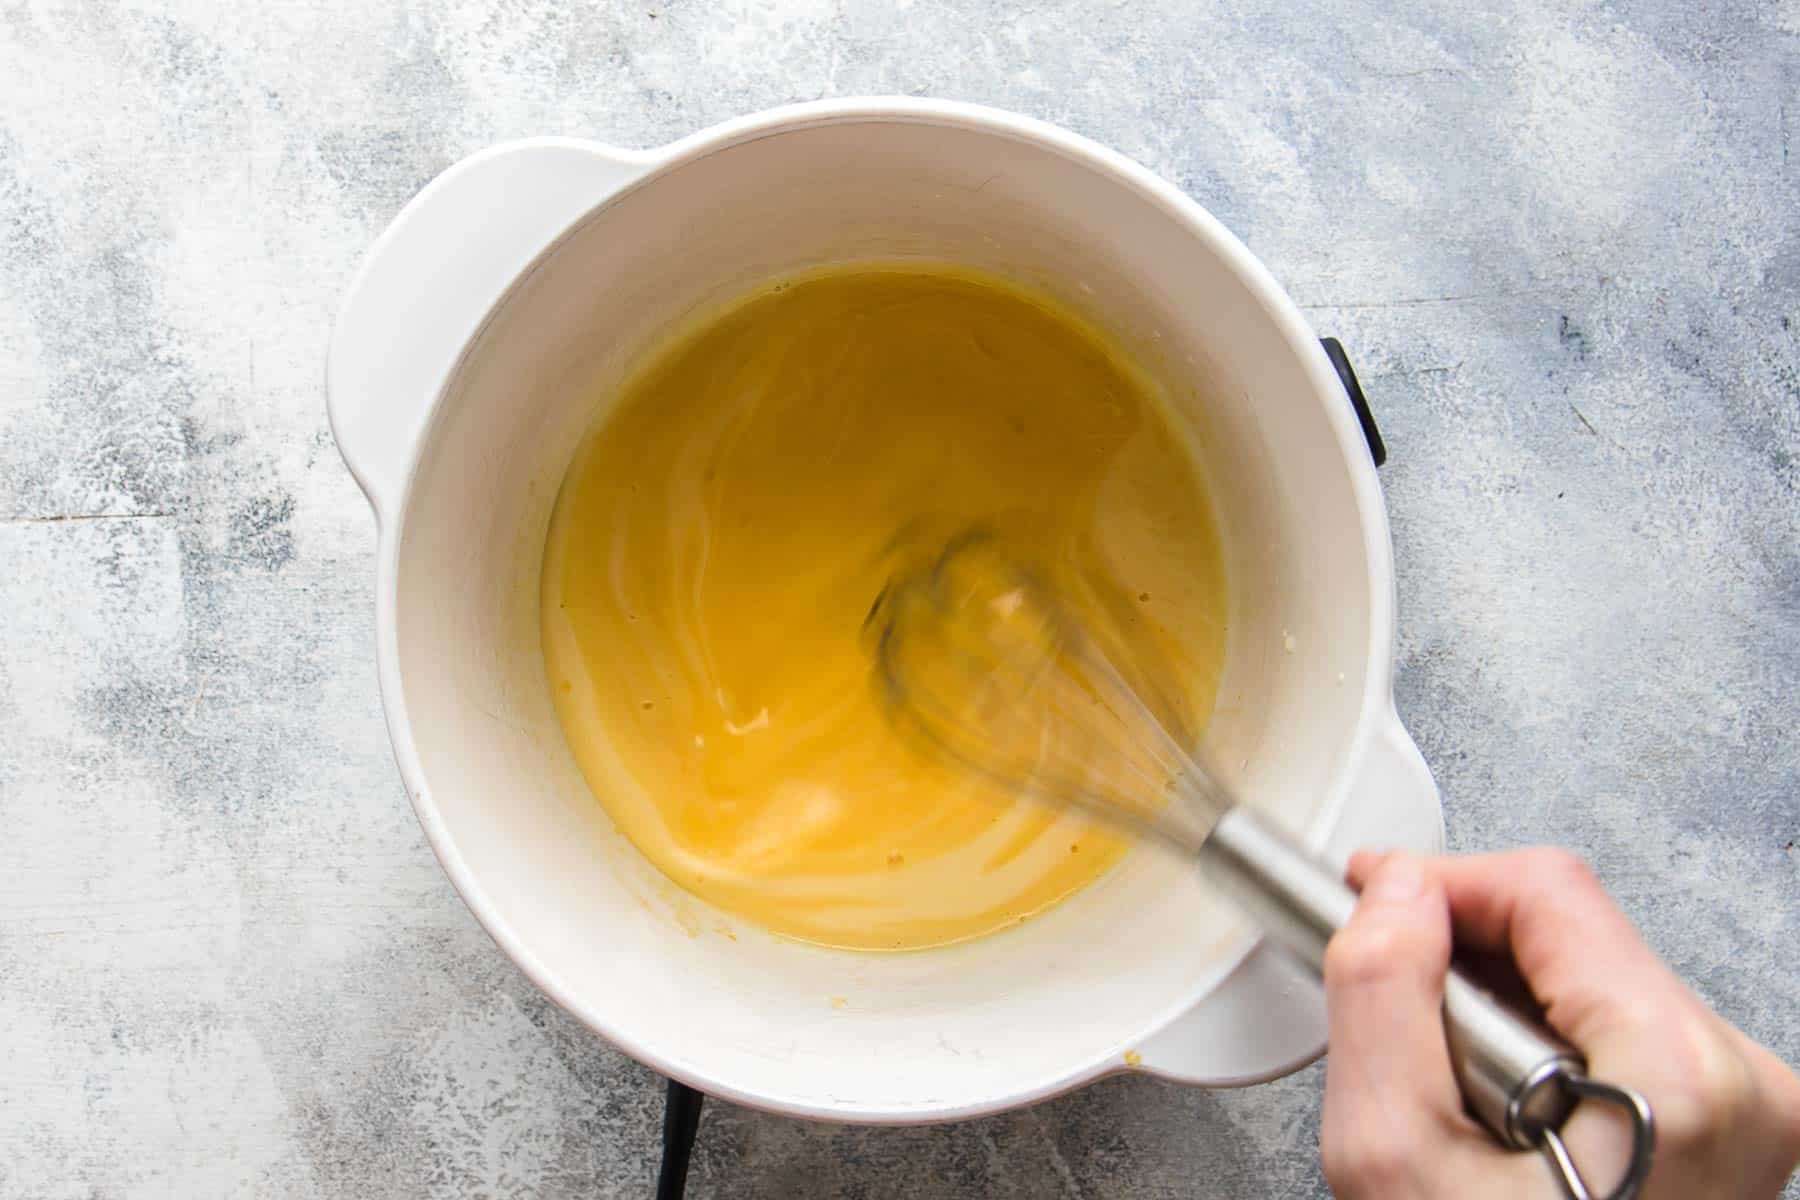 Cooking egg yolks, heavy cream, and sugar in a large white pot over heat